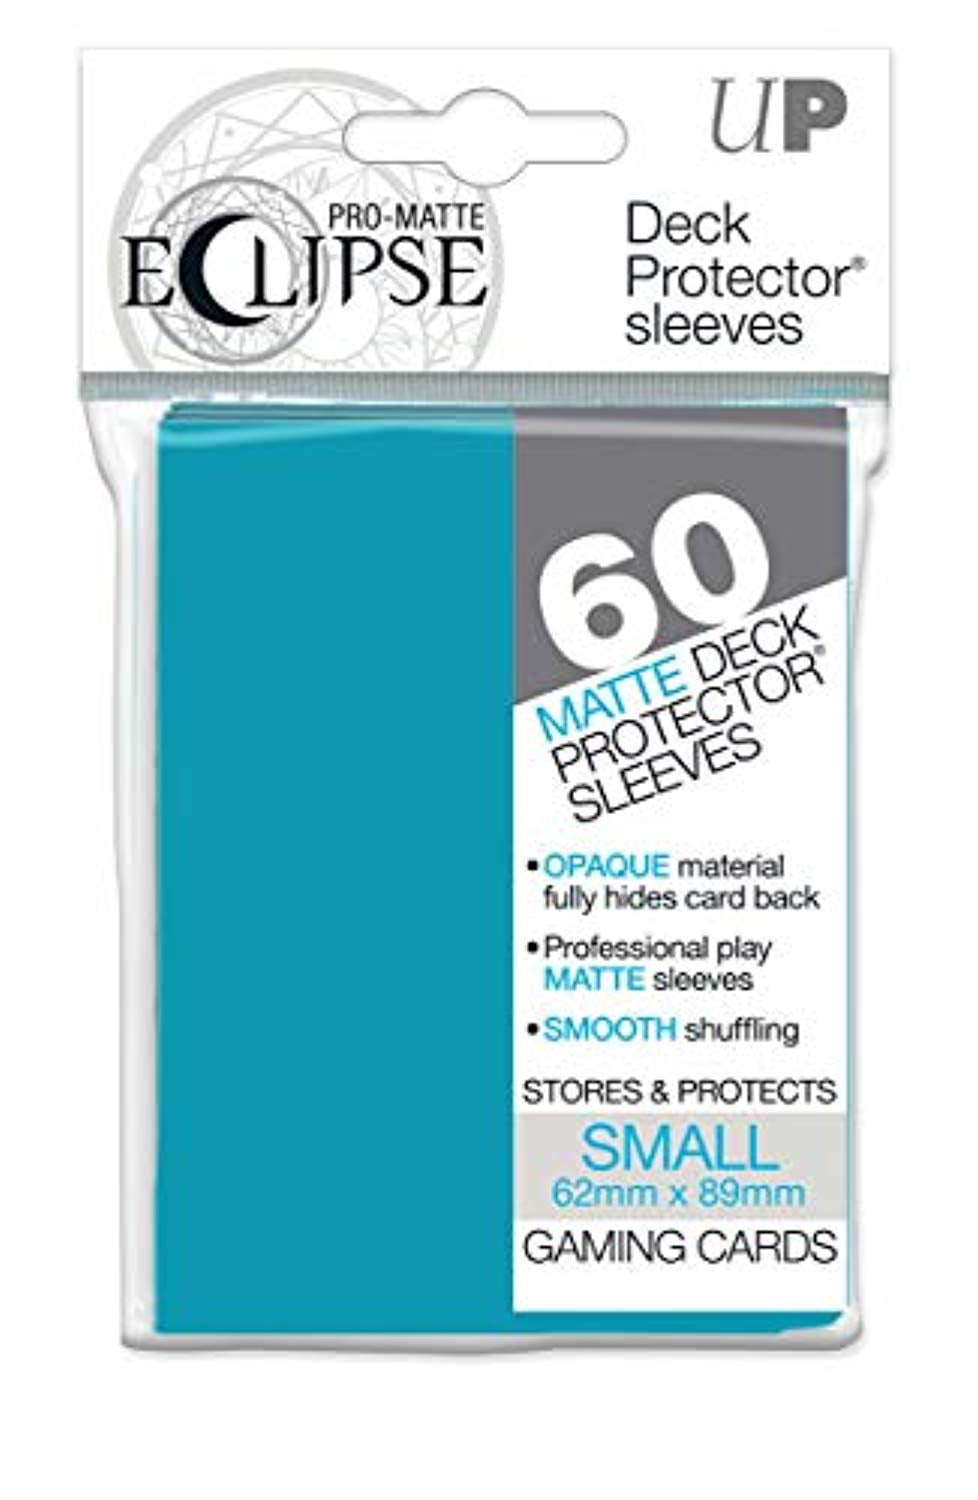 PRO-Matte Eclipse Pacific Blue Standard Deck Protector sleeves 200ct Ultra Pro 